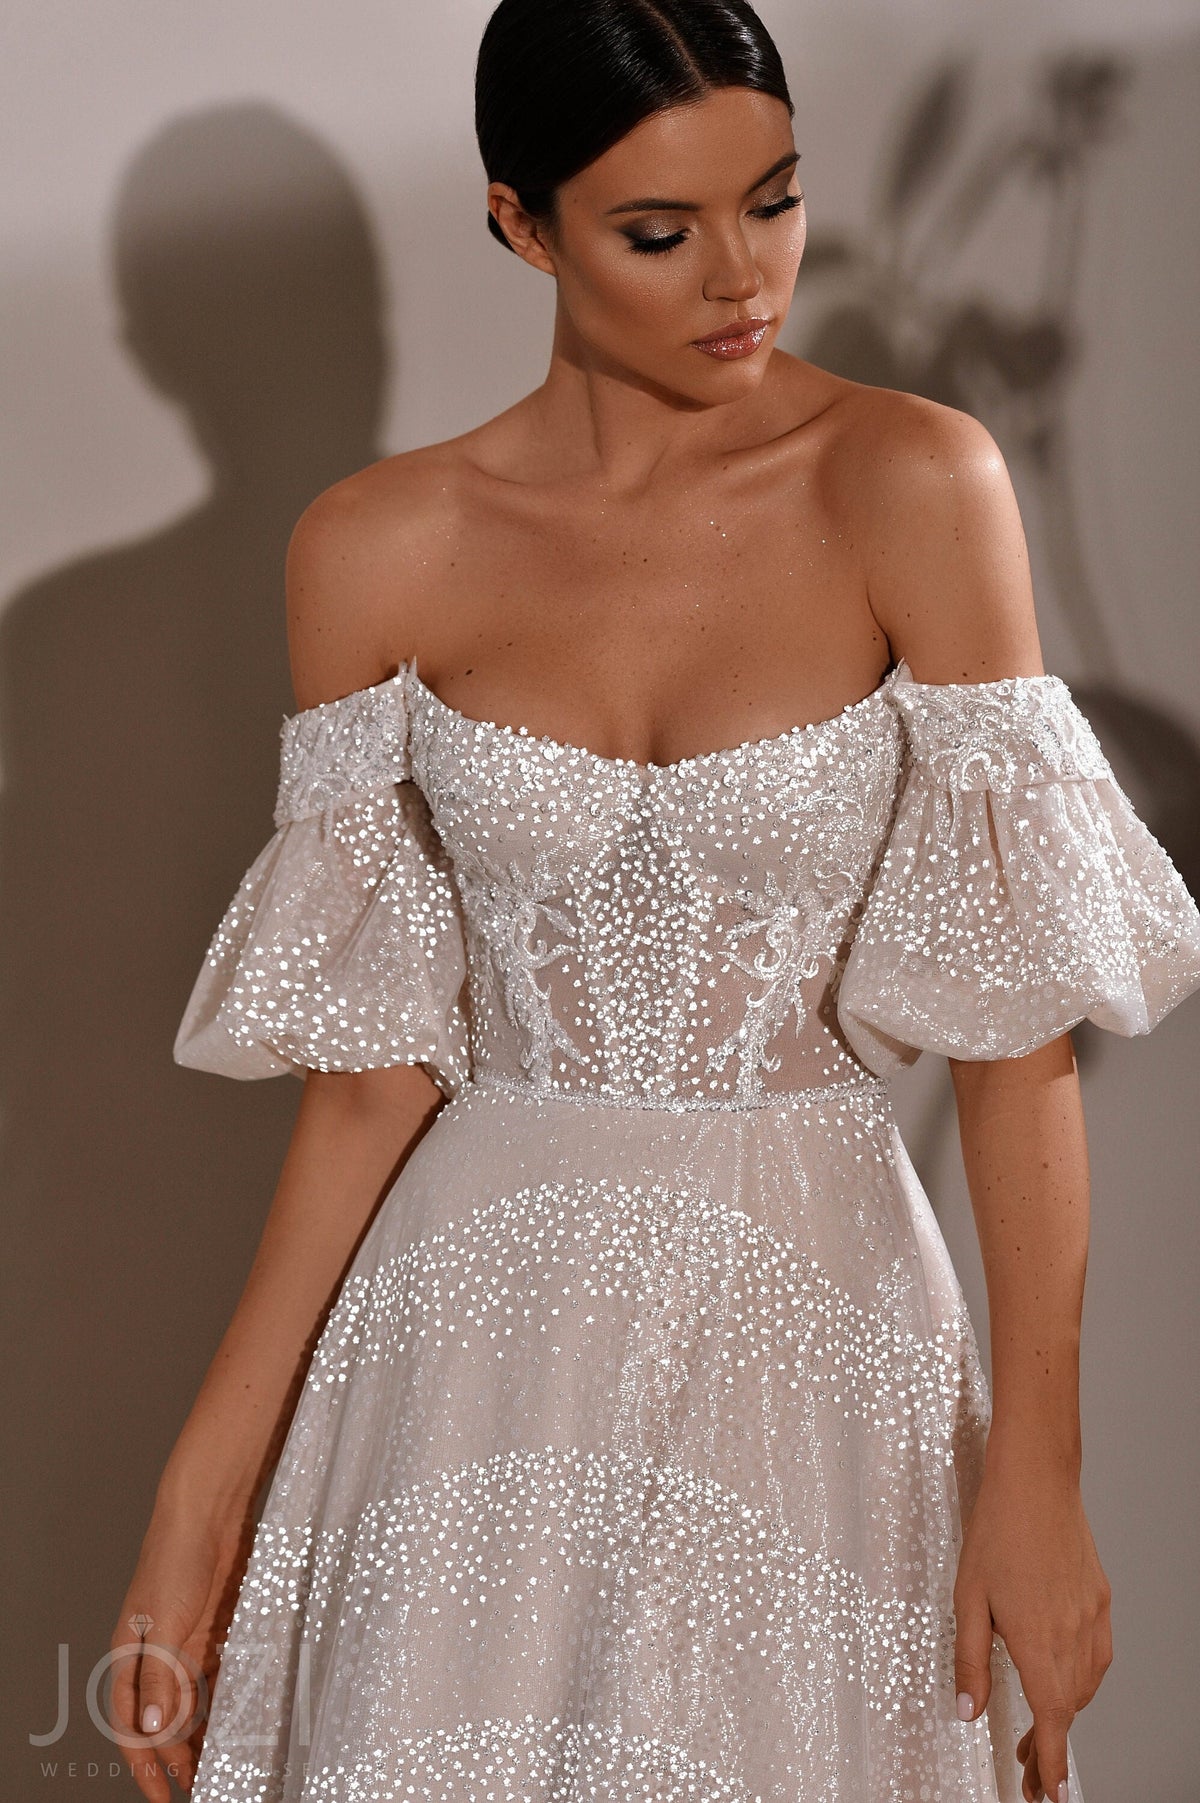 Beautiful Sparkle Unique Design Off The Shoulder Short Puff Sleeve A-Line Wedding Dress Bridal Gown Eye Catching Open Back Corset Lace Up